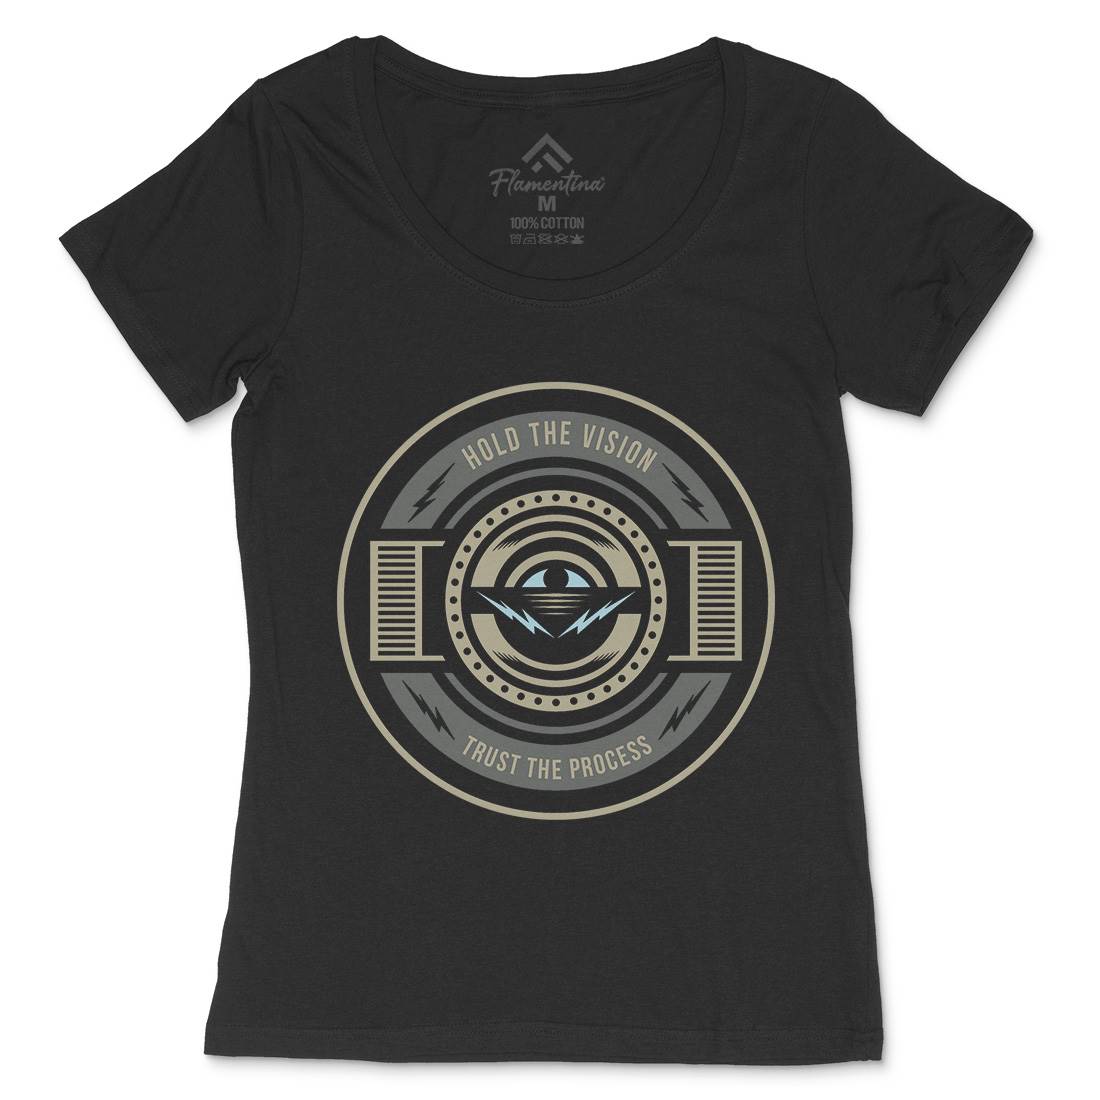 Hold The Vision Womens Scoop Neck T-Shirt Illuminati A331